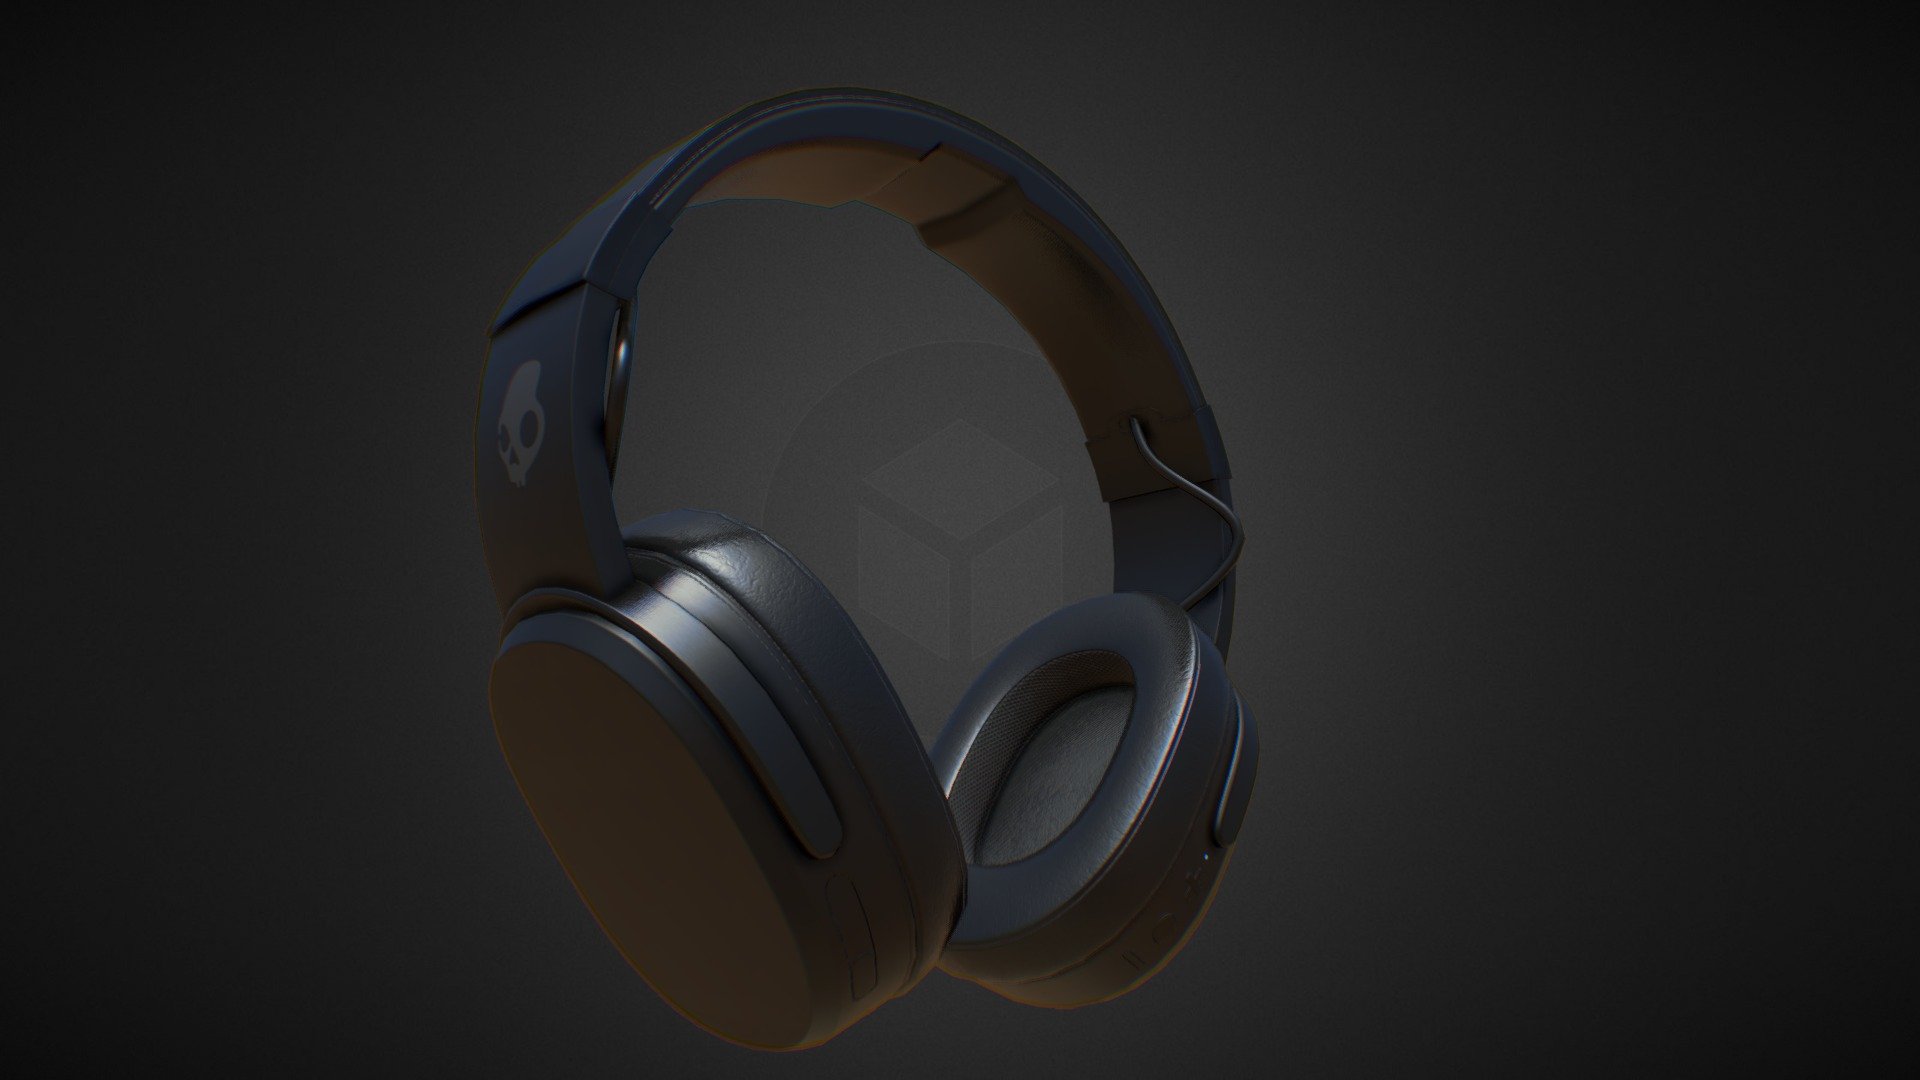 The best headphones i ever had! So i decided to make them in 3D :)                               

Free to download! 4K textures.                                                                                 

Made in Blender and Substance Painter 3d model